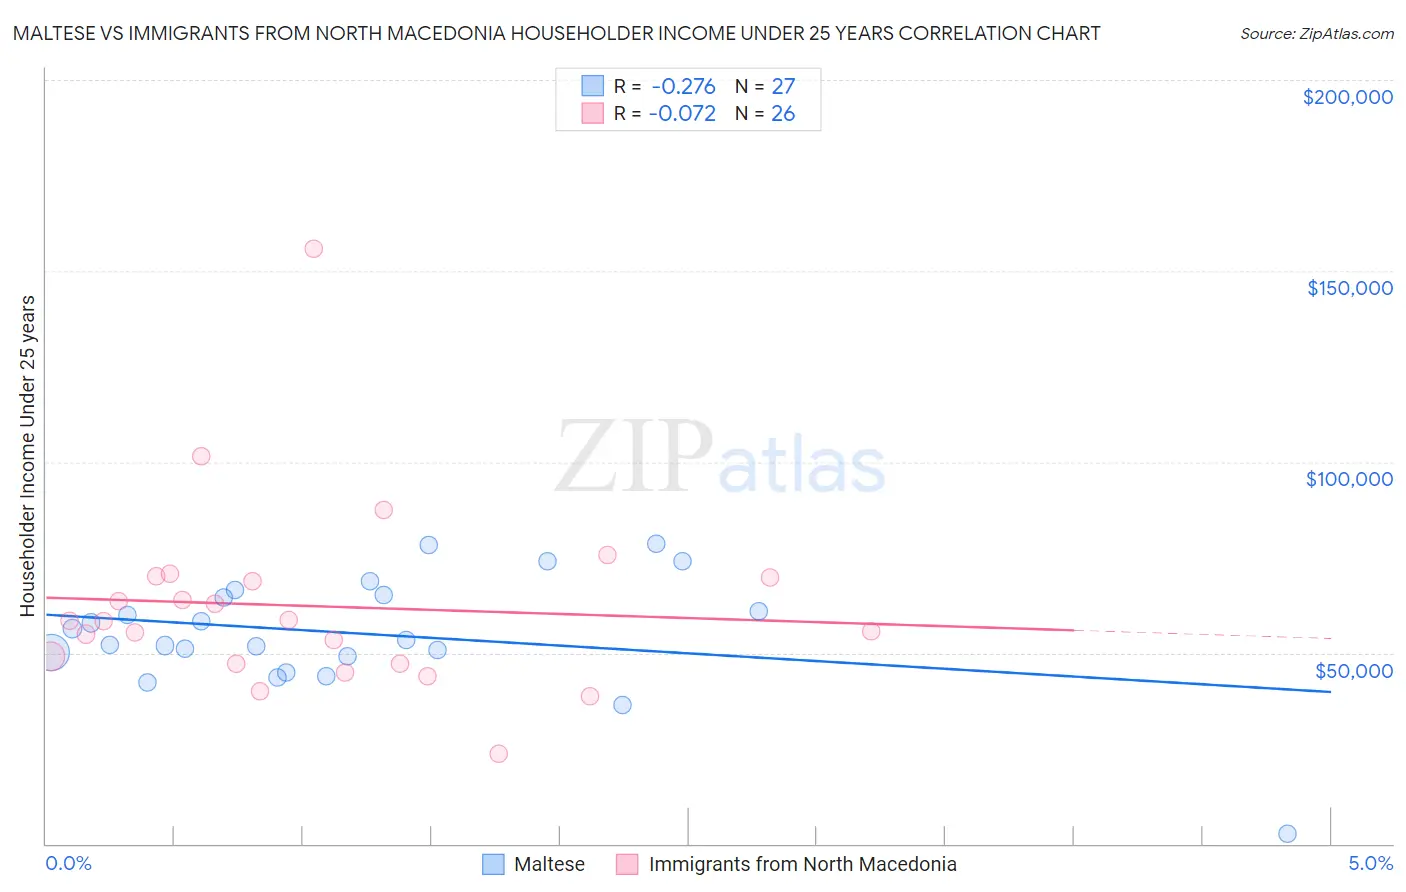 Maltese vs Immigrants from North Macedonia Householder Income Under 25 years